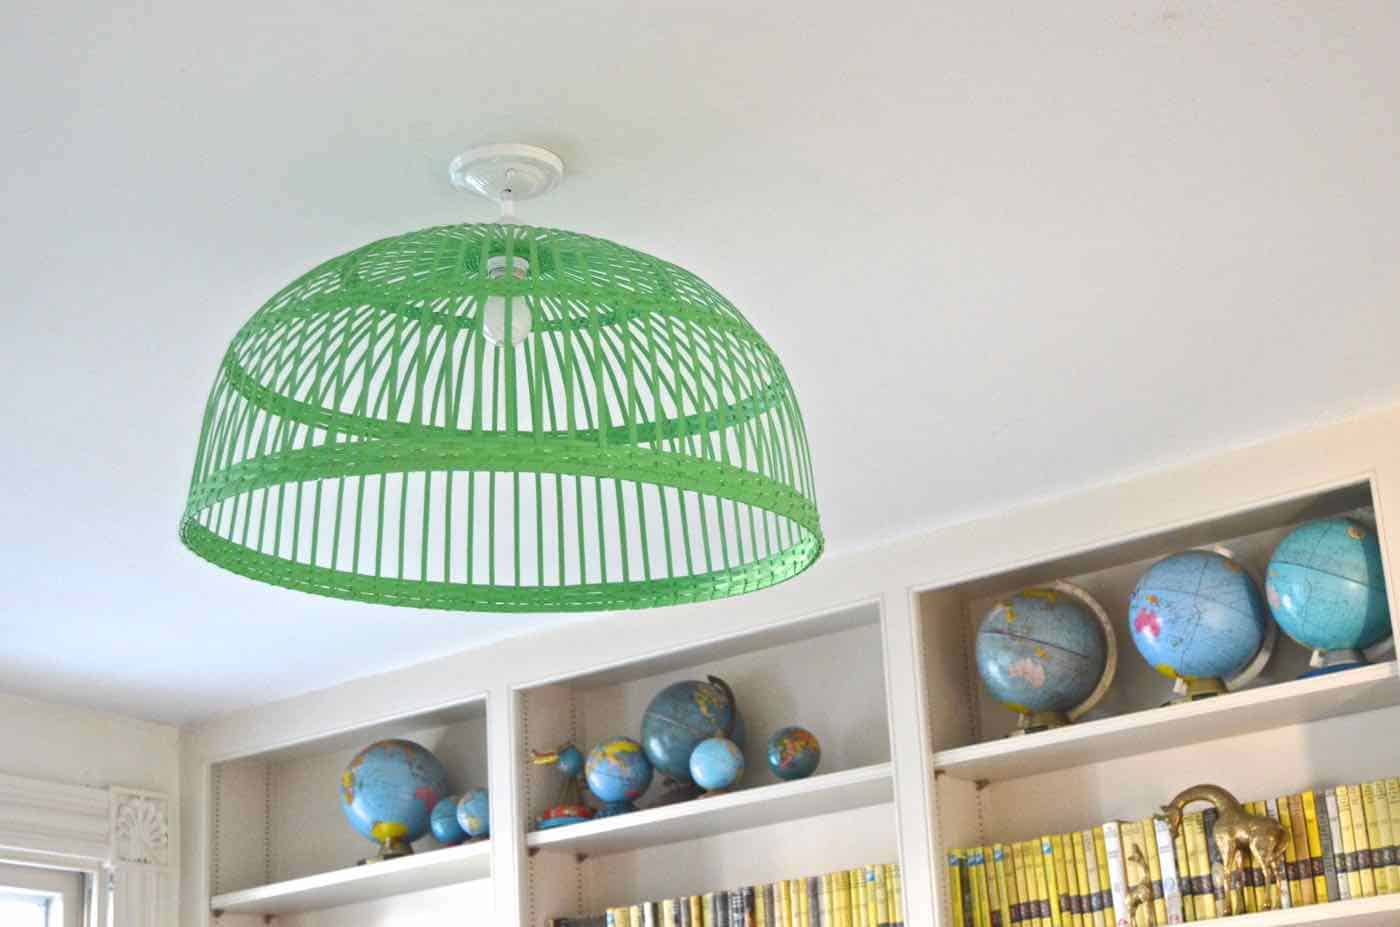 easy way to update a pendant light